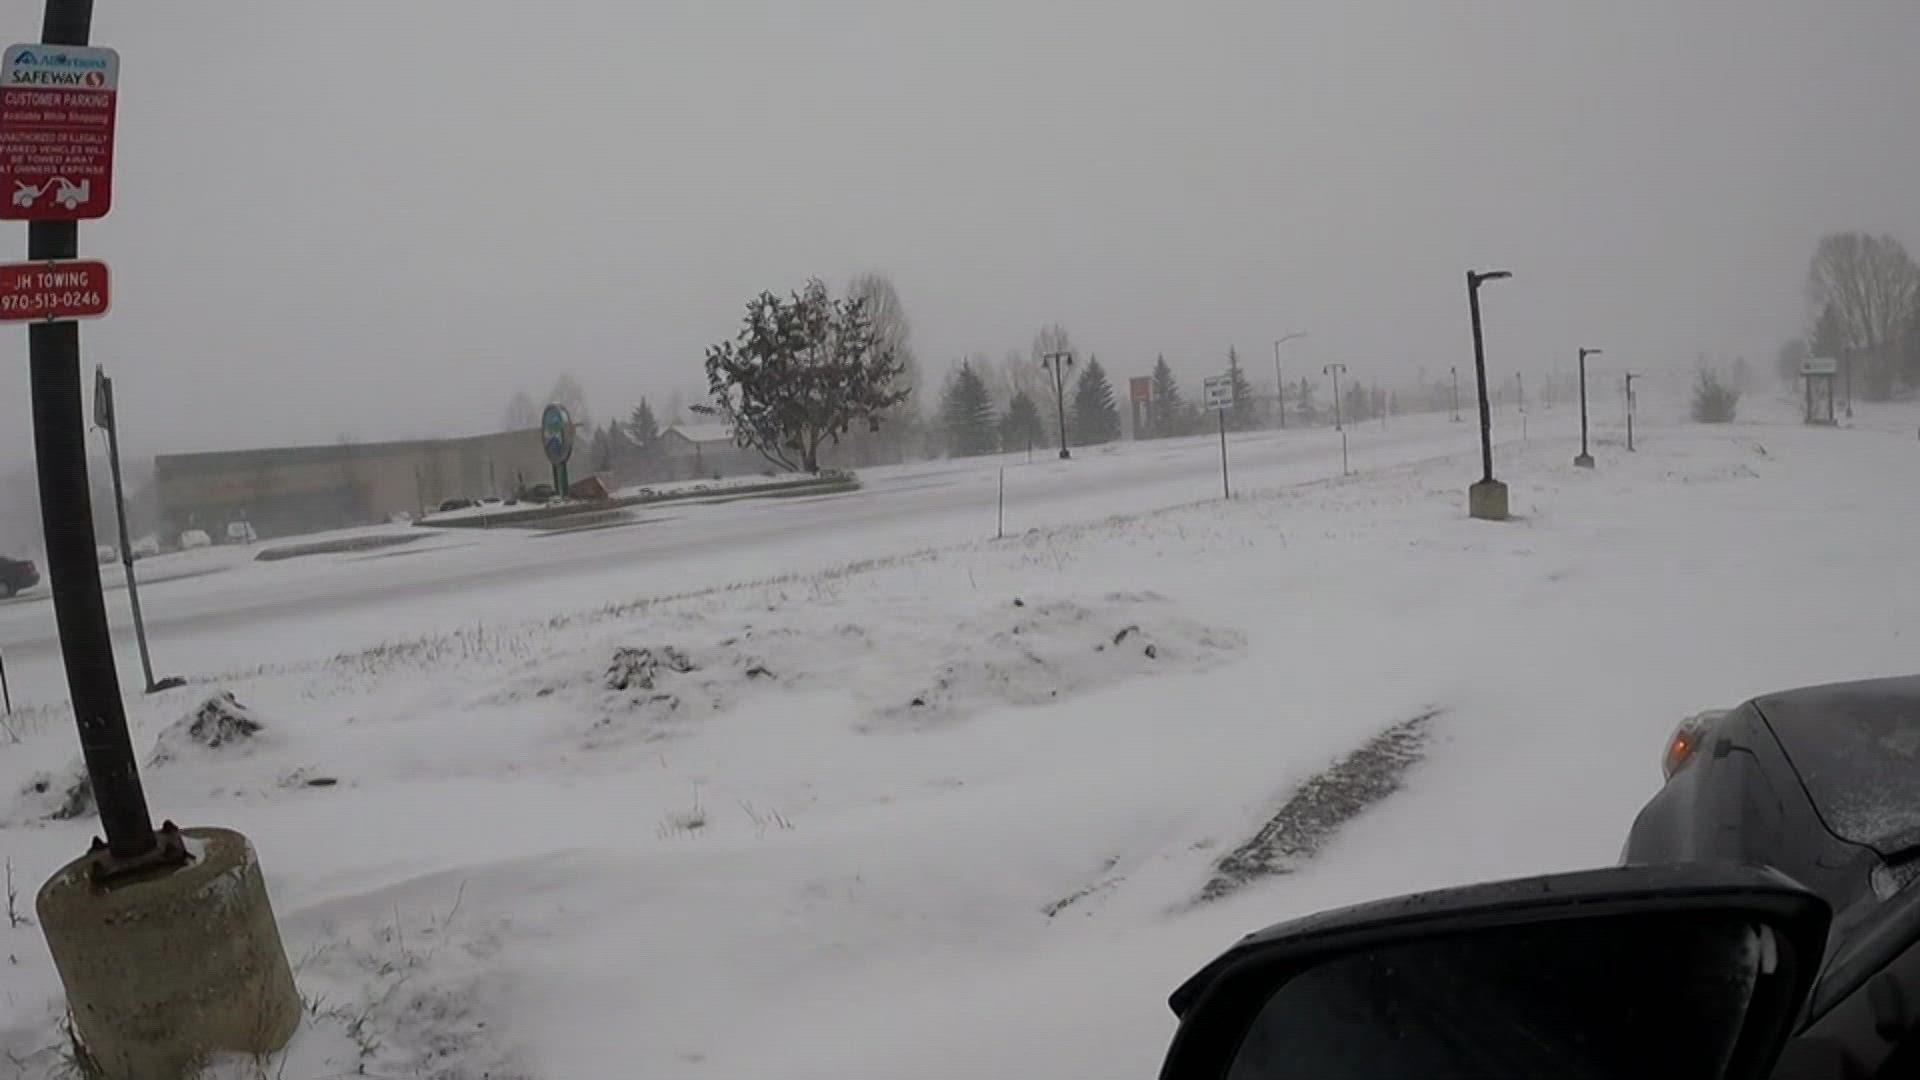 Matt Renoux has a look at blowing snow near Frisco on Tuesday morning as a winter storm hits Colorado's High Country.